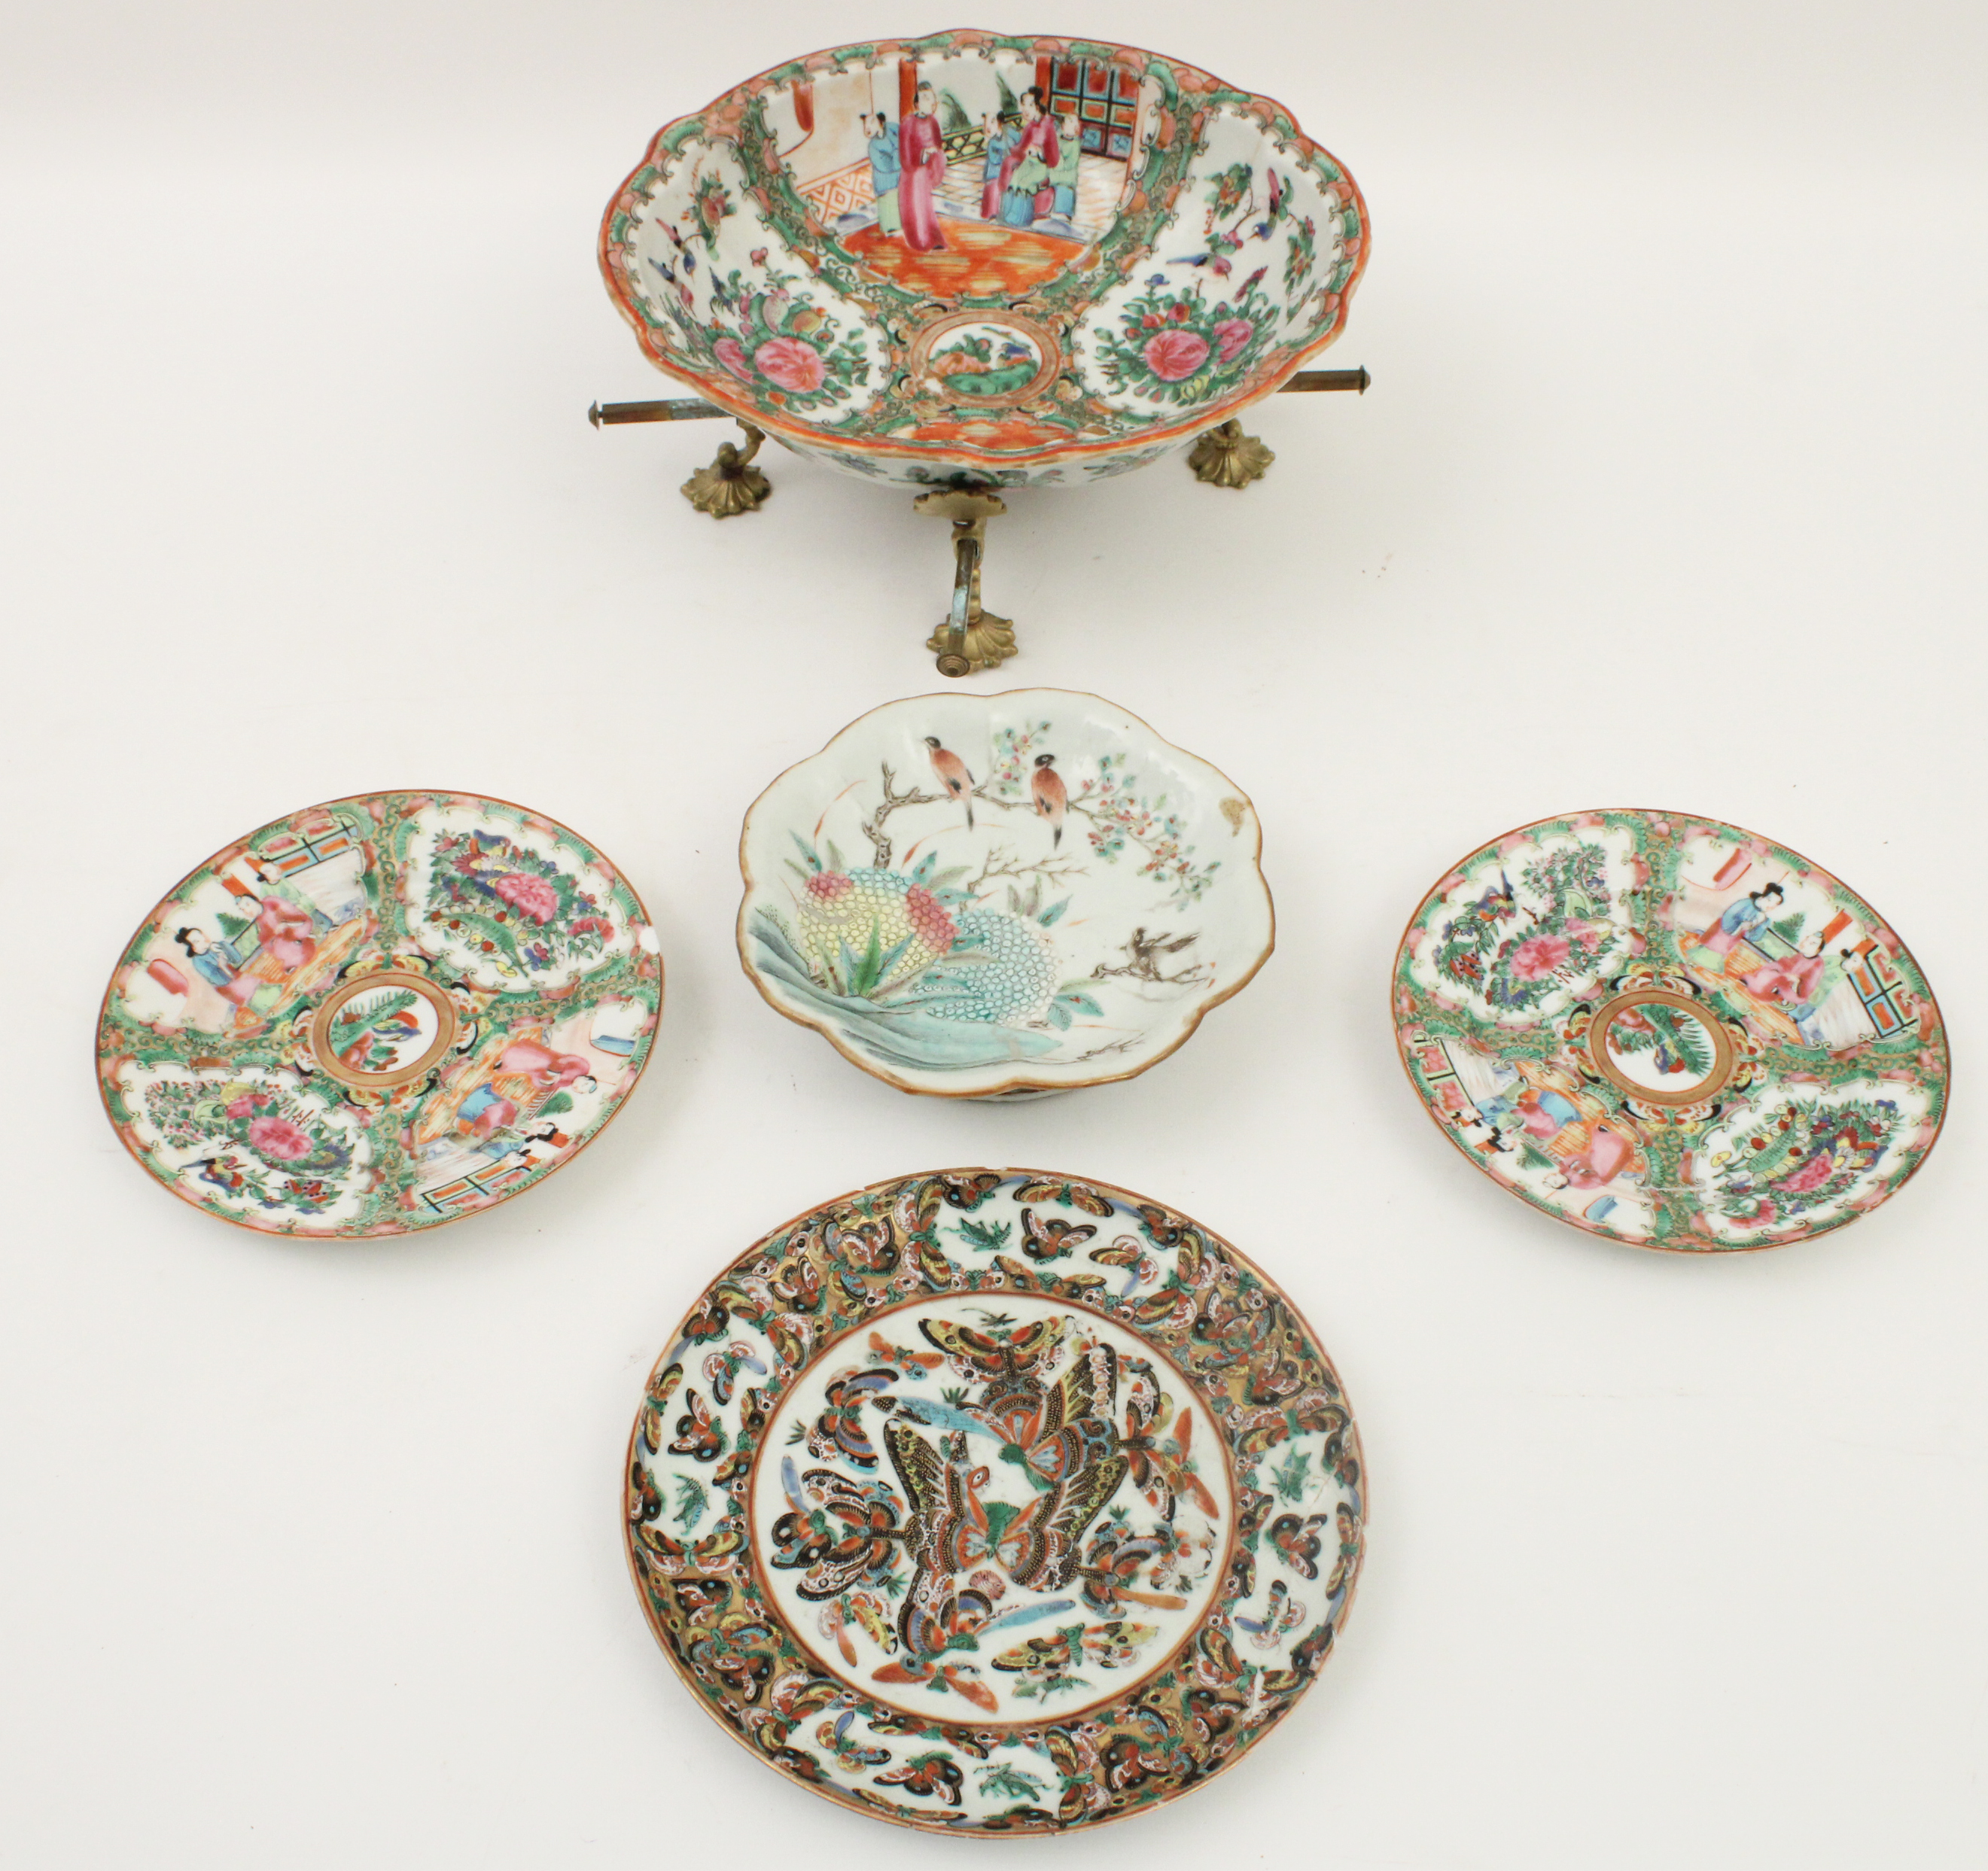 ROSE FAMILLE 5 piece lot of Chinese